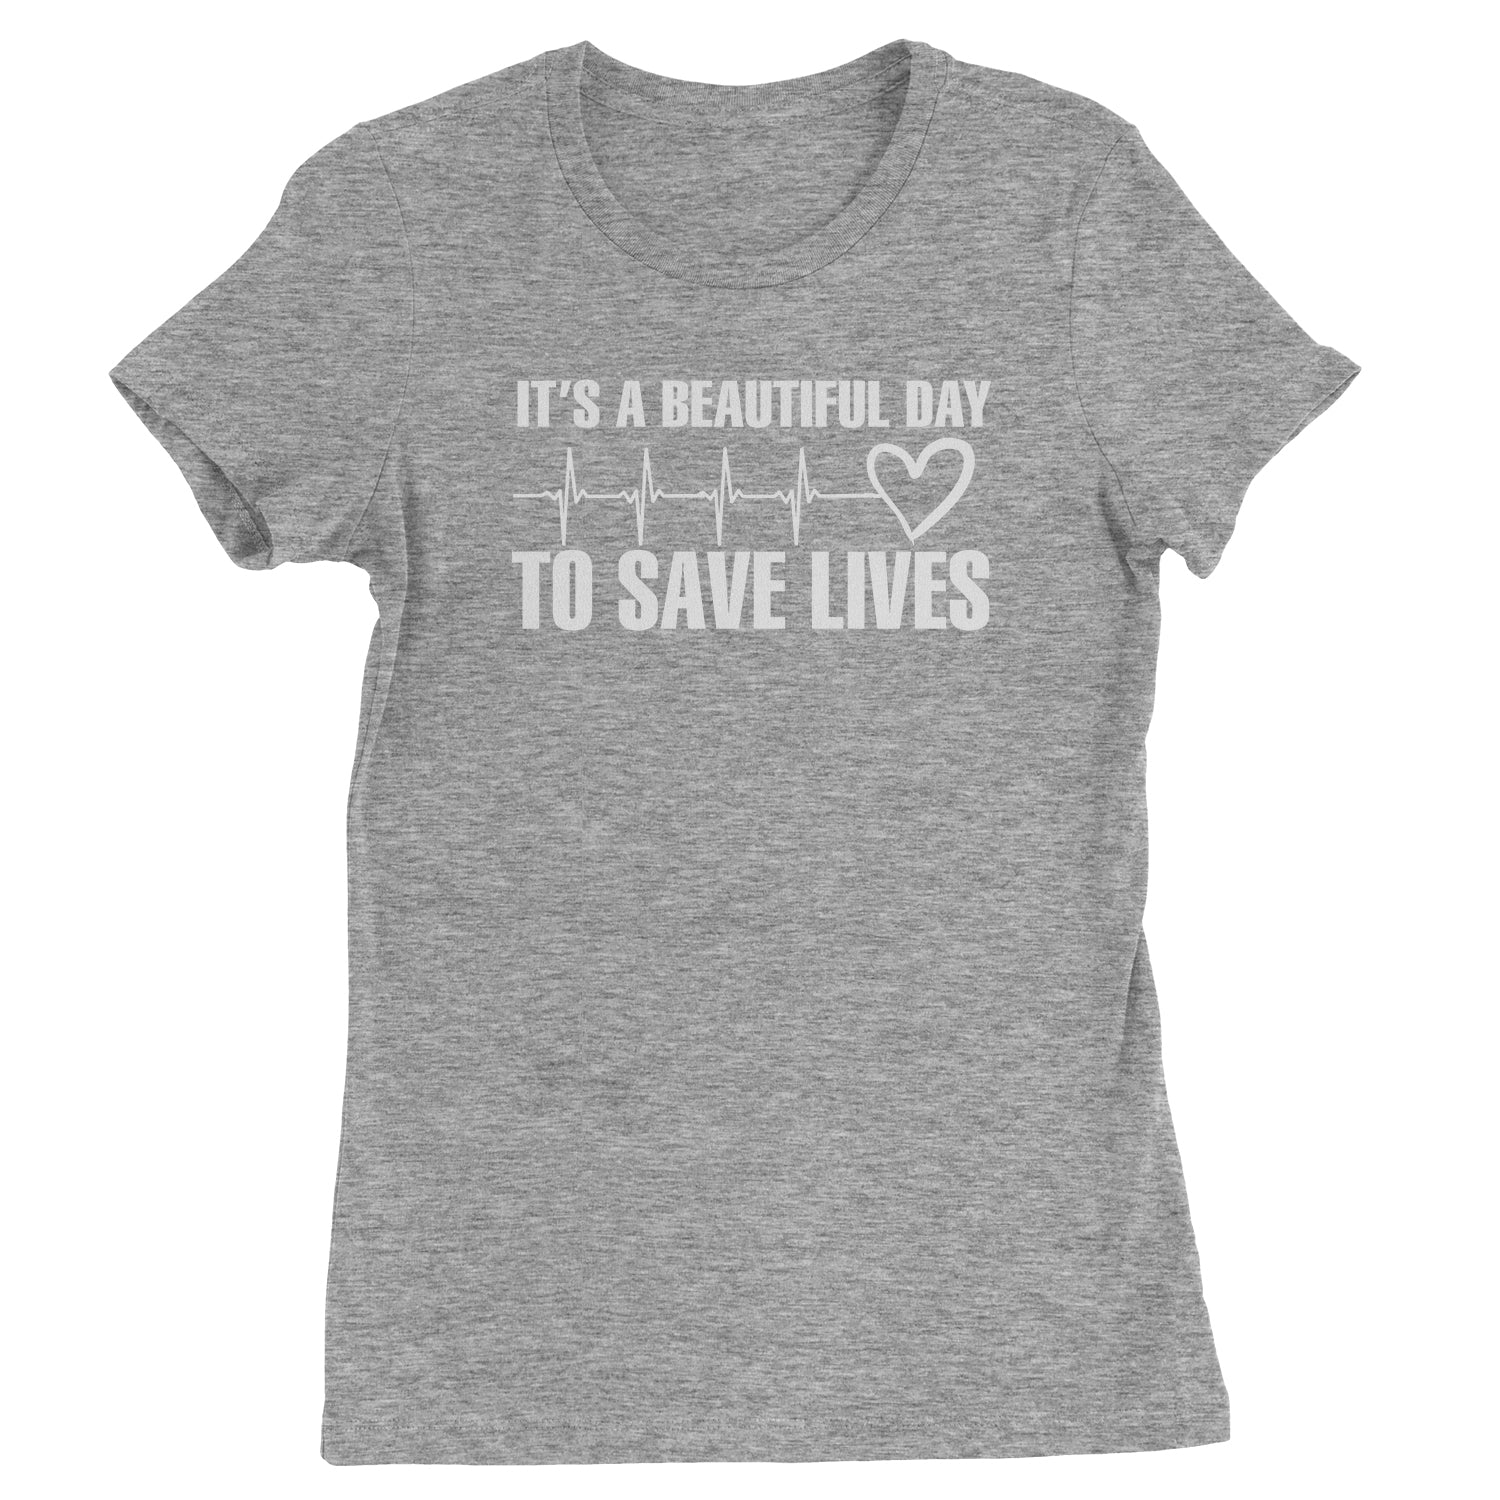 It's A Beautiful Day To Save Lives (White Print) Womens T-shirt #expressiontees by Expression Tees